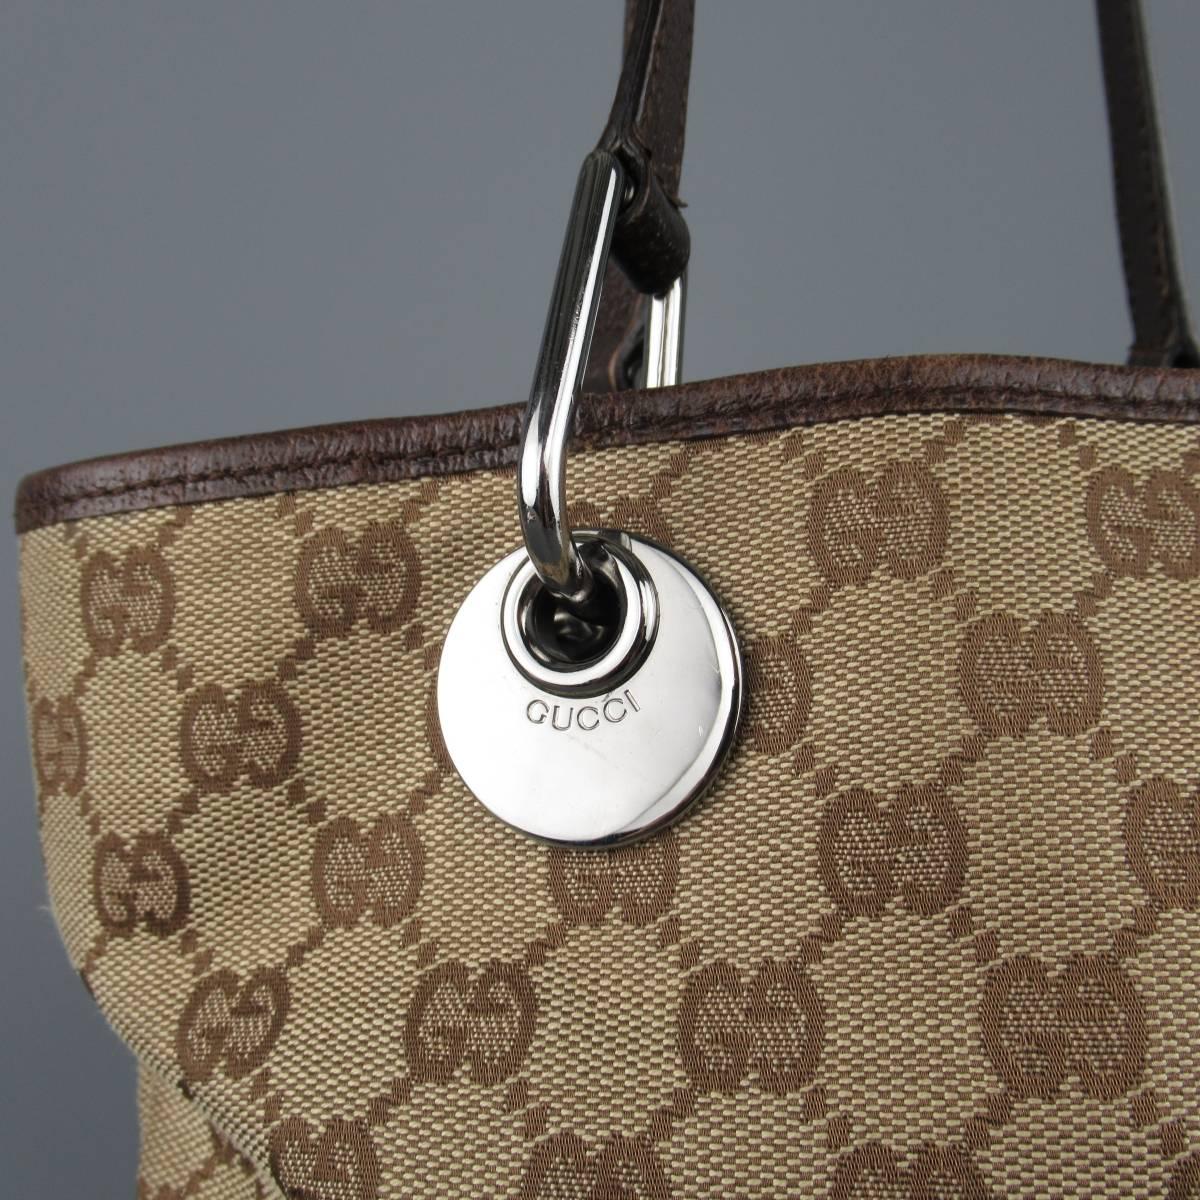 Classic GUCCI mini tote comes in beige and brown Guccissima monogram canvas and features brown leather piping and top handles with dark silver tone engraved hardware. Wear on corners. As-Is. Made in Italy.
 
Fair Pre-Owned Condition.
